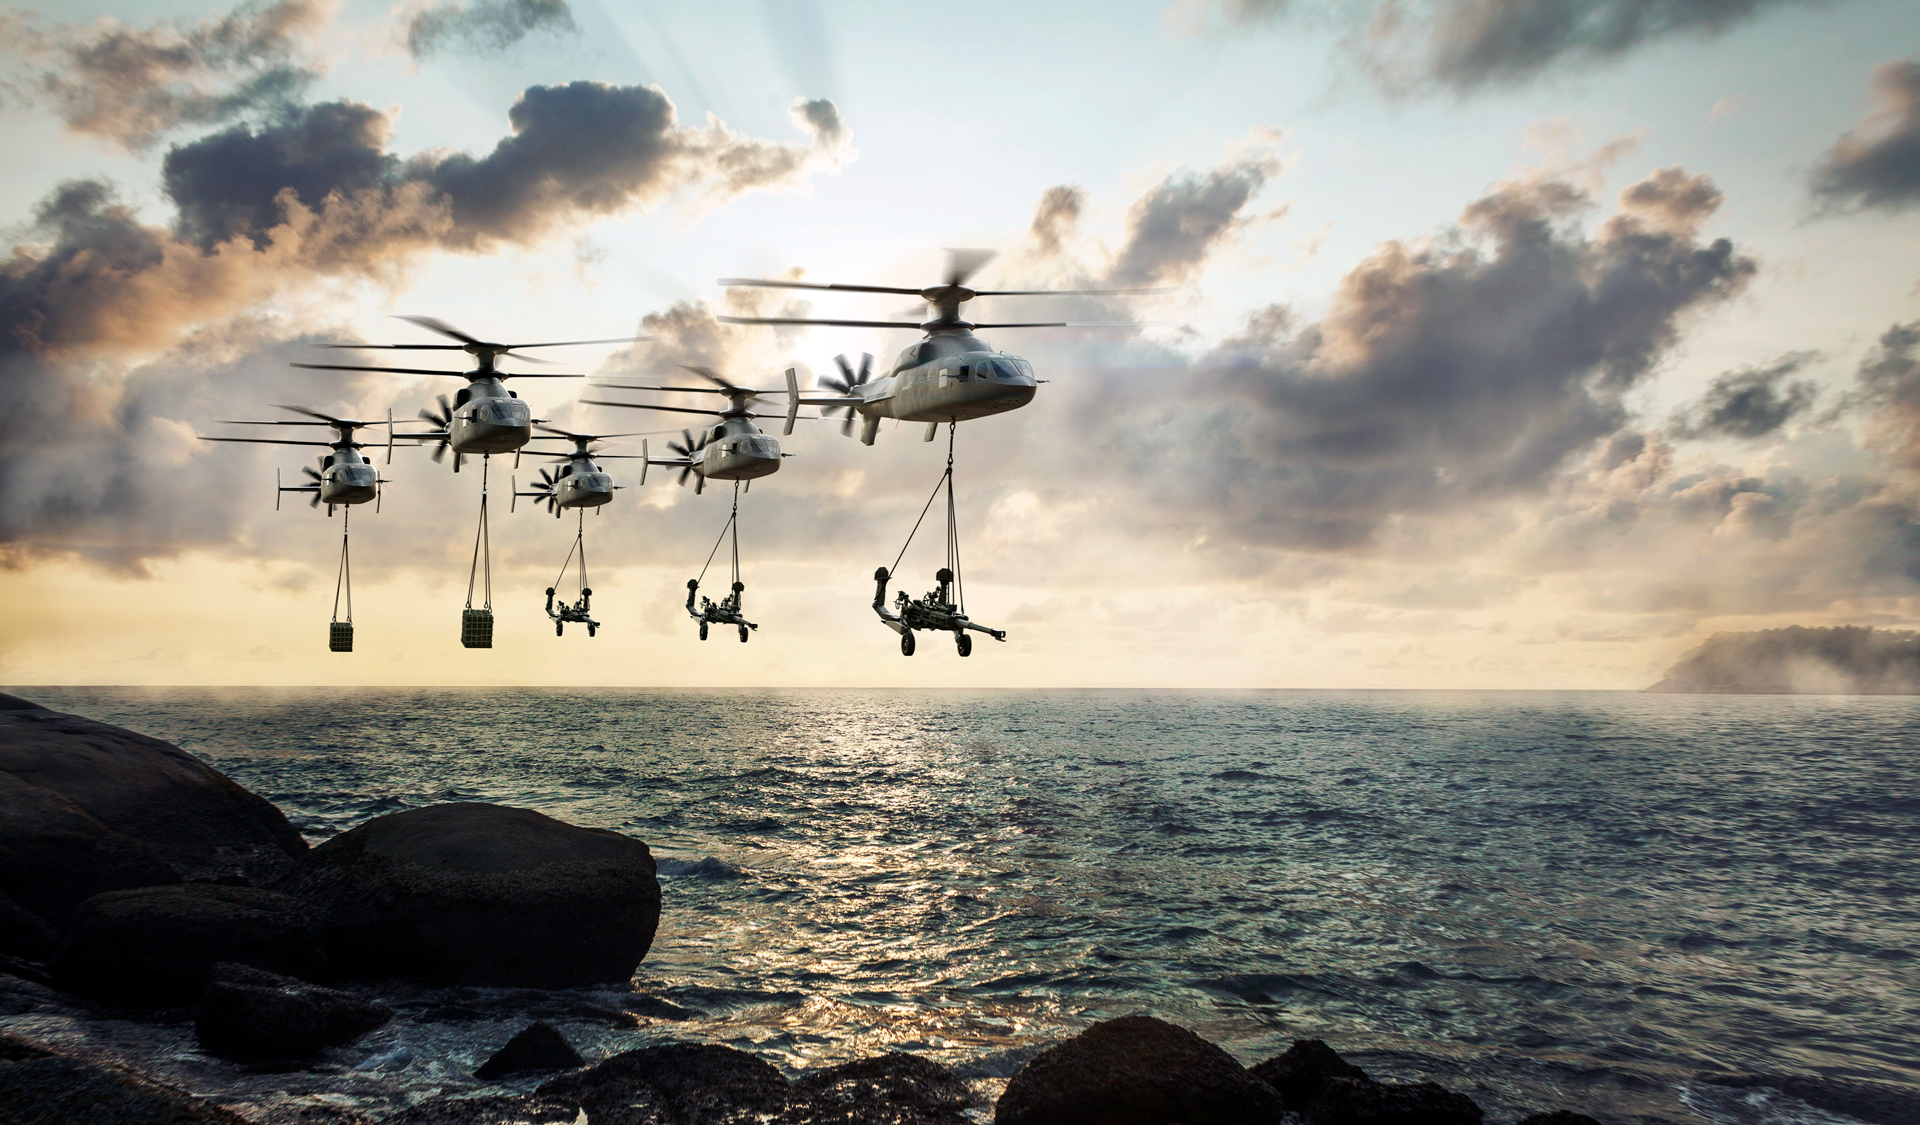 Sikorsky, a Lockheed Martin Company, and Boeing announced six new members of Team DEFIANT who will support DEFIANT X®, the advanced helicopter for the U.S. Army’s Future Long-Range Assault Aircraft (FLRAA) competition.